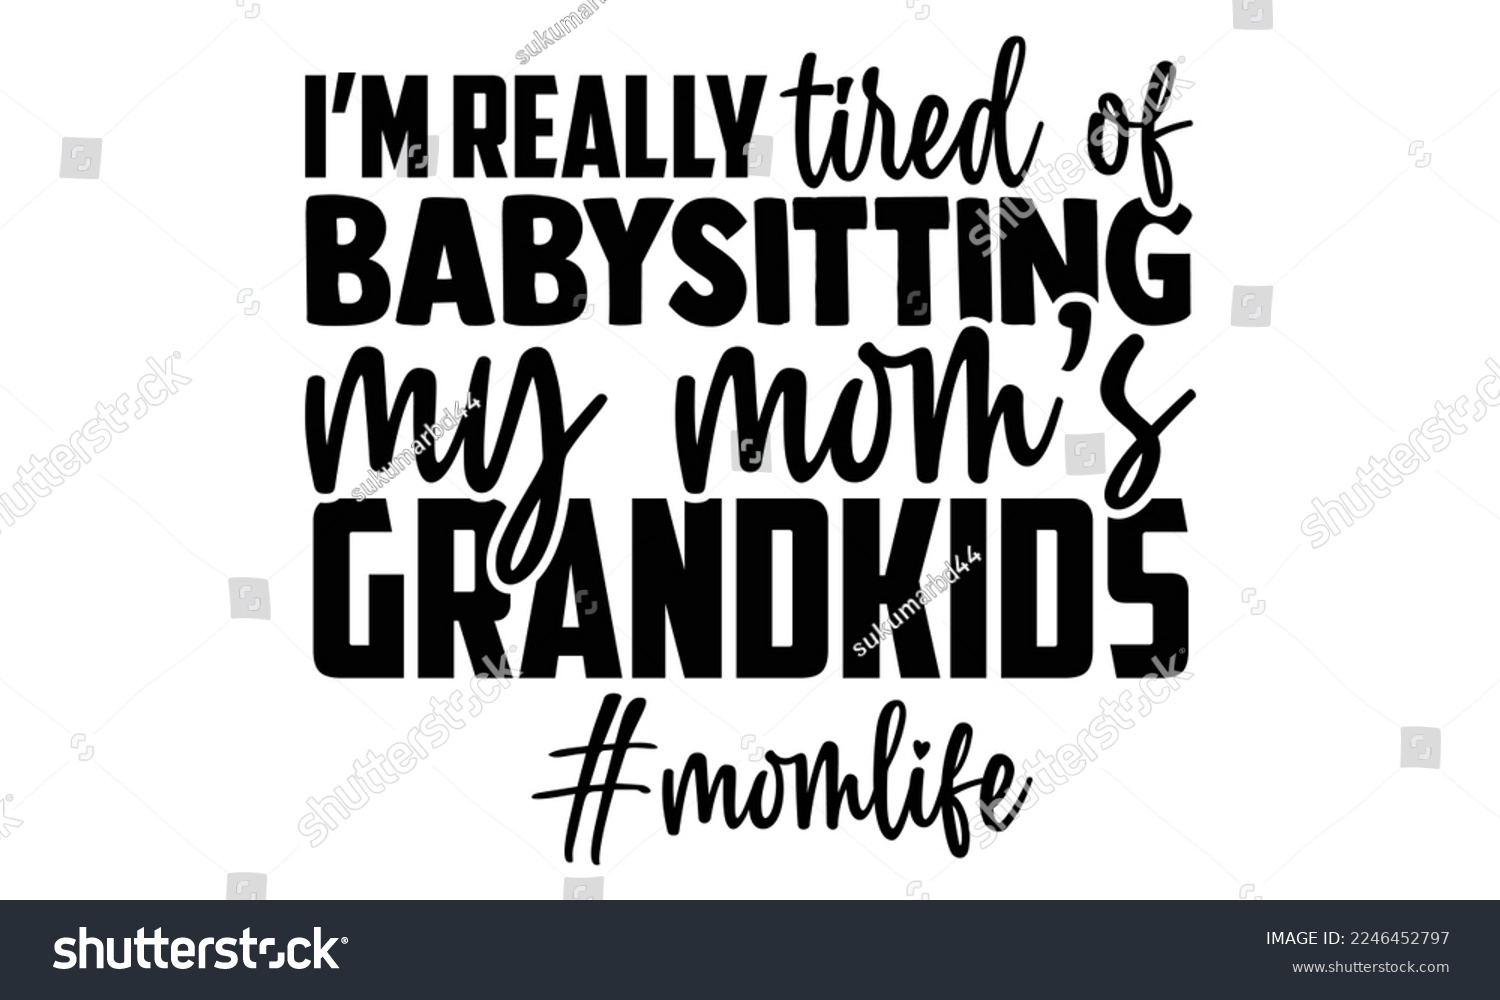 SVG of I’m Really Tired Of Babysitting My Mom’s Grandkids - Babysitting svg quotes Design, Cutting Machine, Silhouette Cameo, t-shirt, Hand drawn lettering phrase isolated on white background. svg